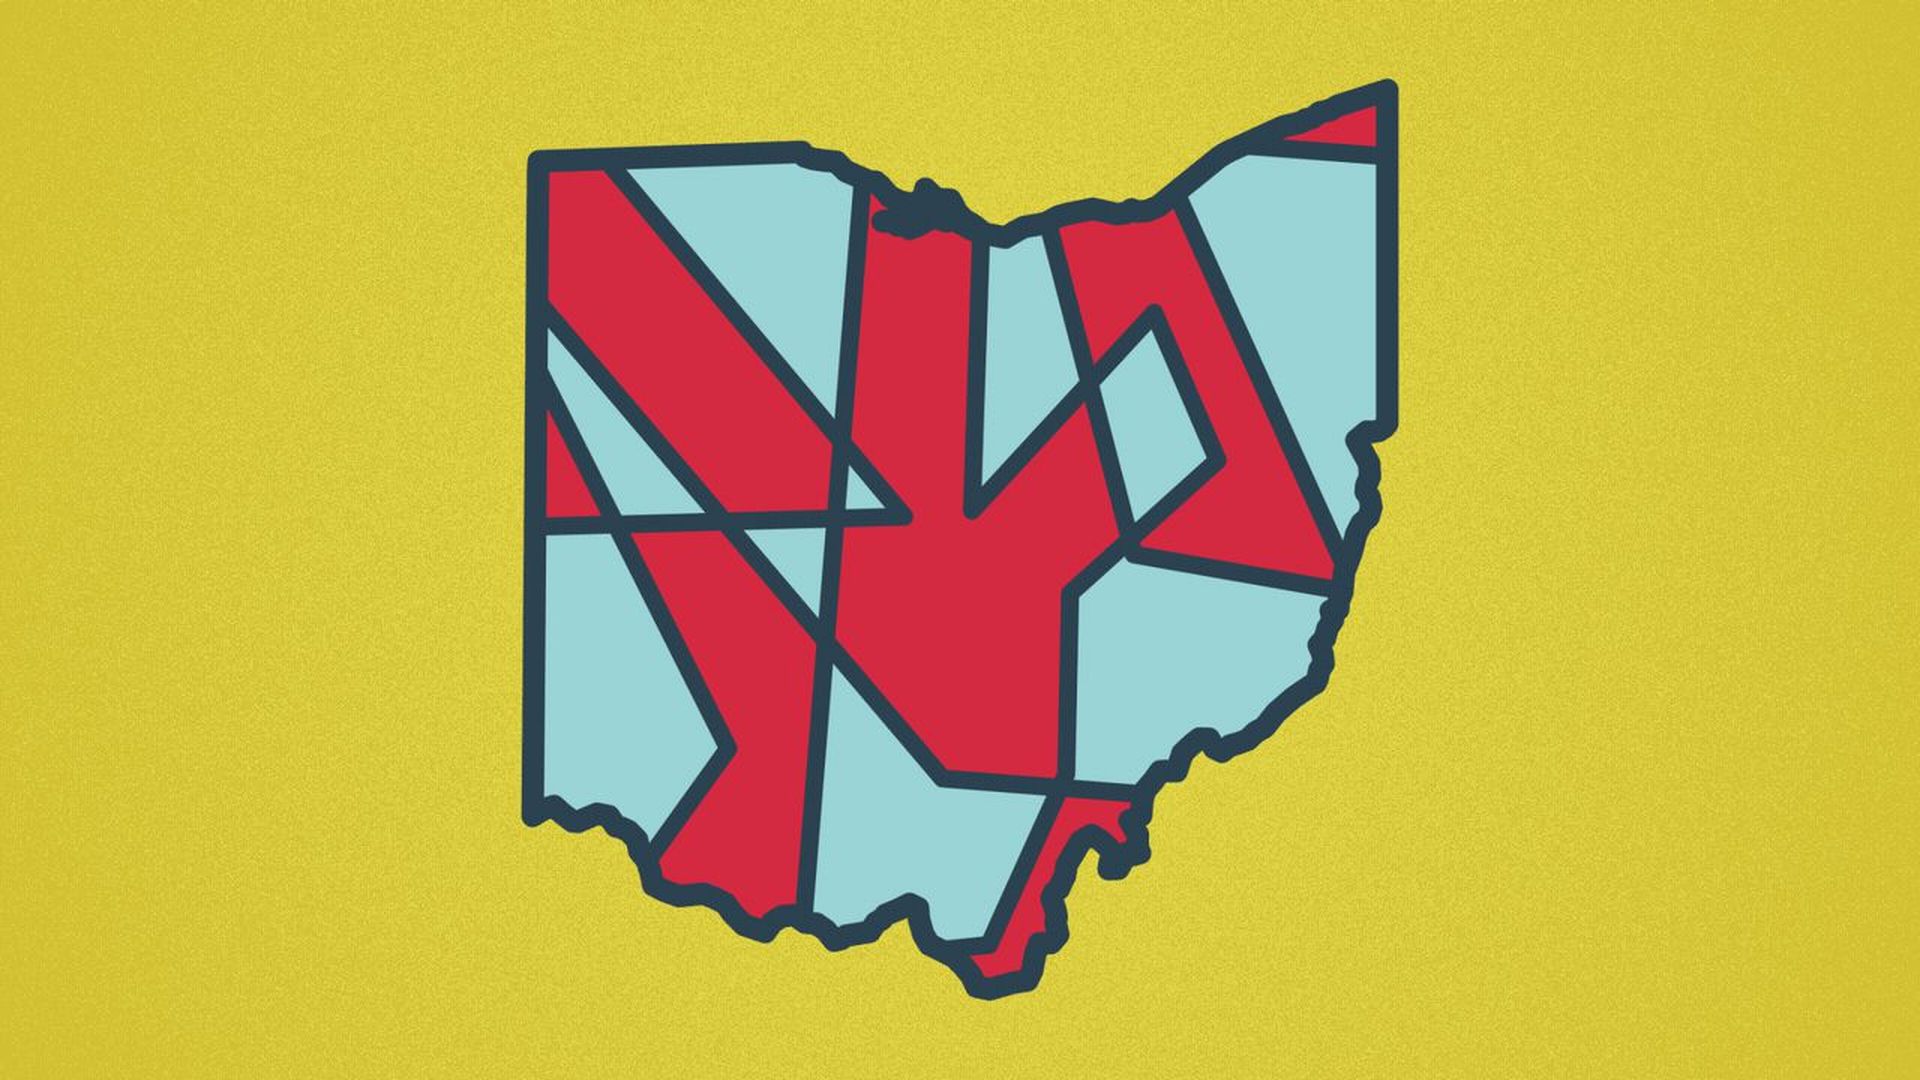 Illustration of the state of Ohio with red and blue districts inside it.